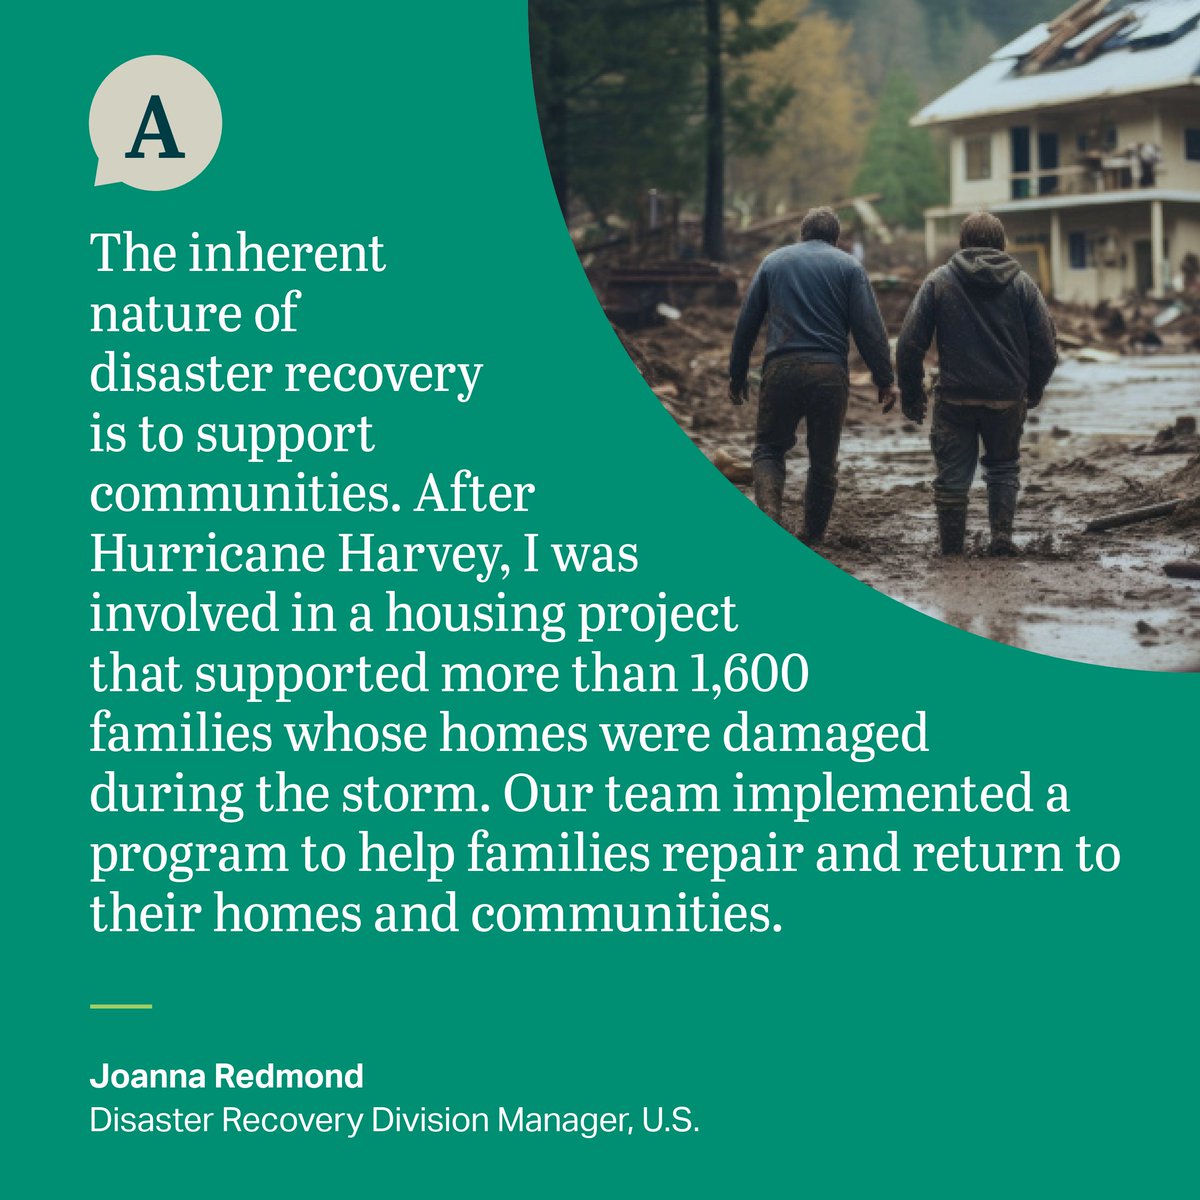 AECOM disaster recovery supporting communities 